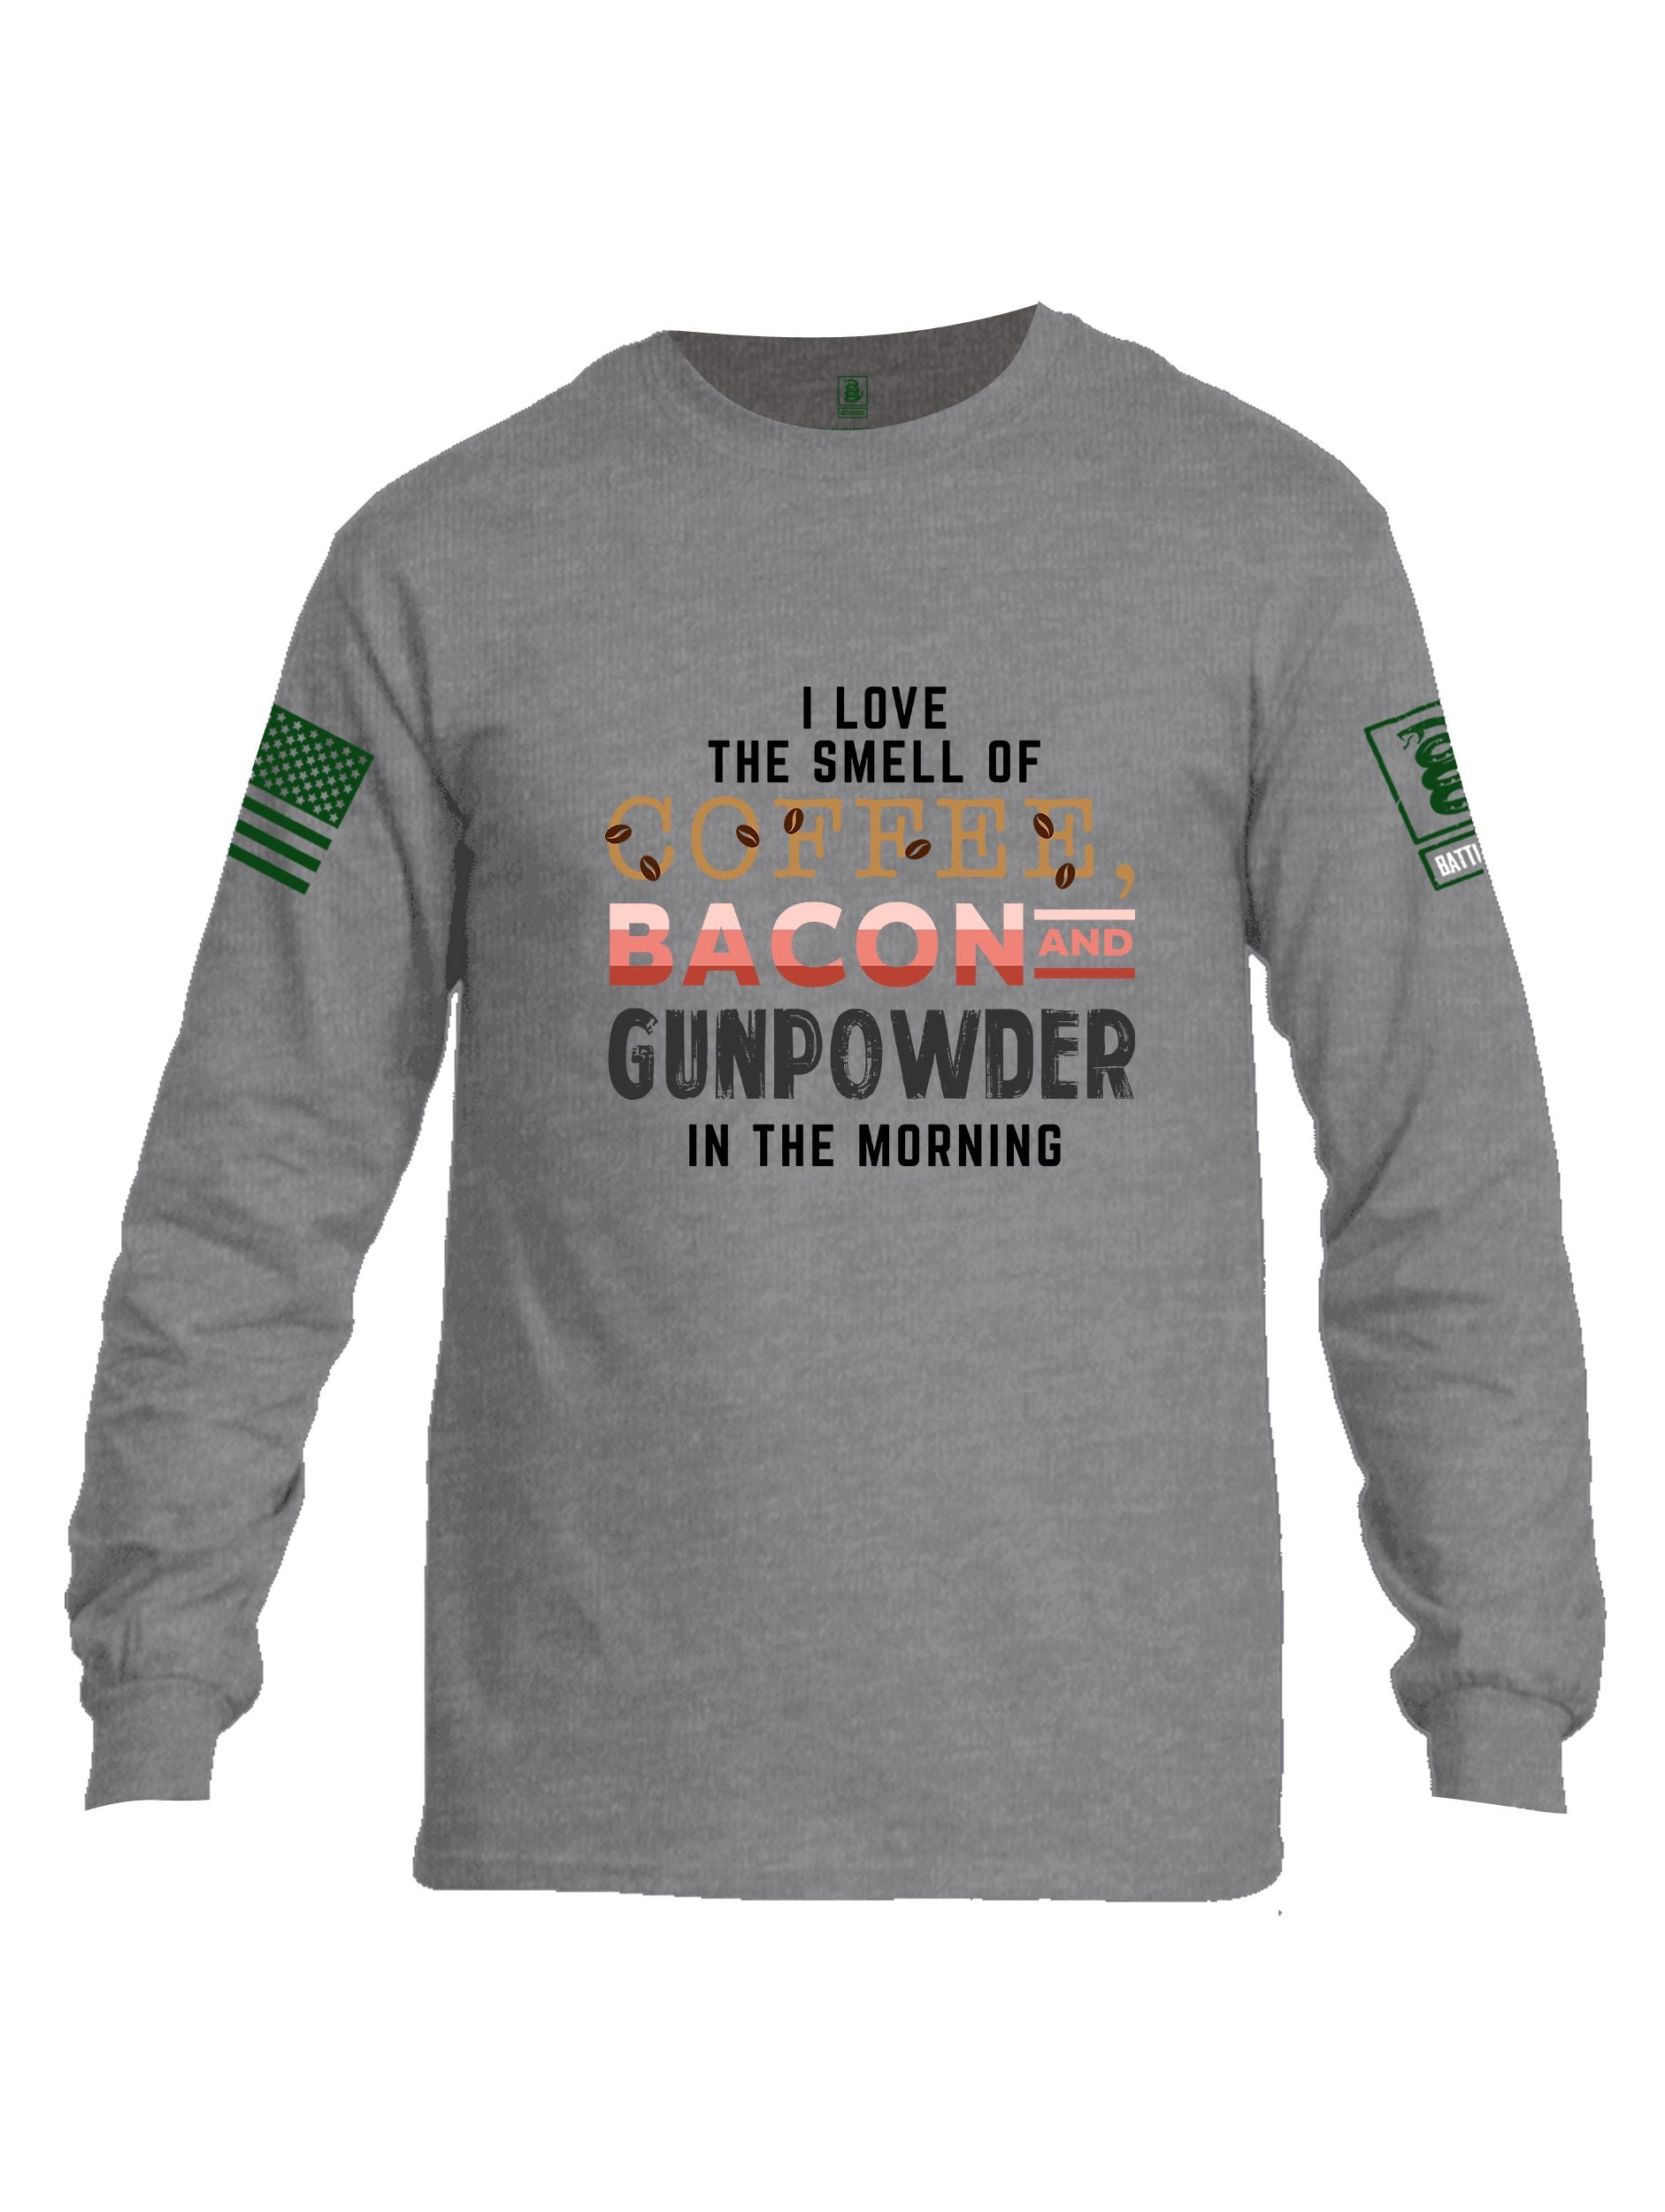 Battleraddle I Love The Smell Of Coffee, Bacon And Gunpowder In The Morning Dark Green Sleeves Men Cotton Crew Neck Long Sleeve T Shirt